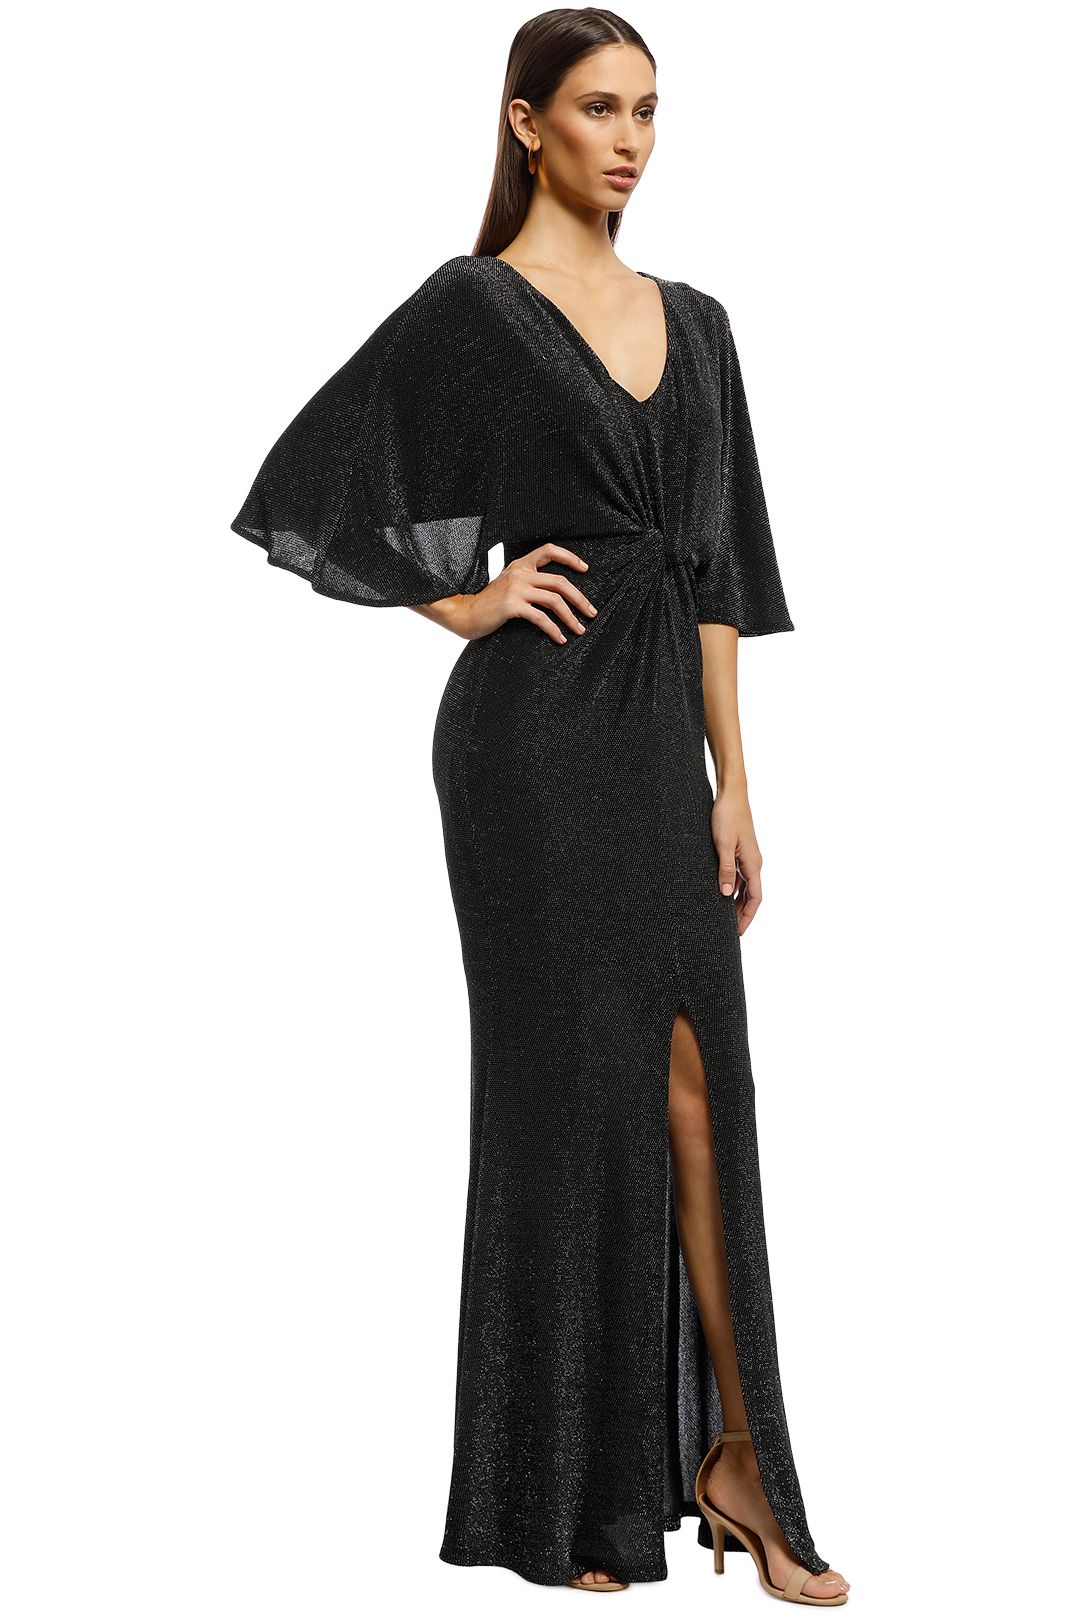 Montique - Diva Metallic Gown - Charcoal - Side